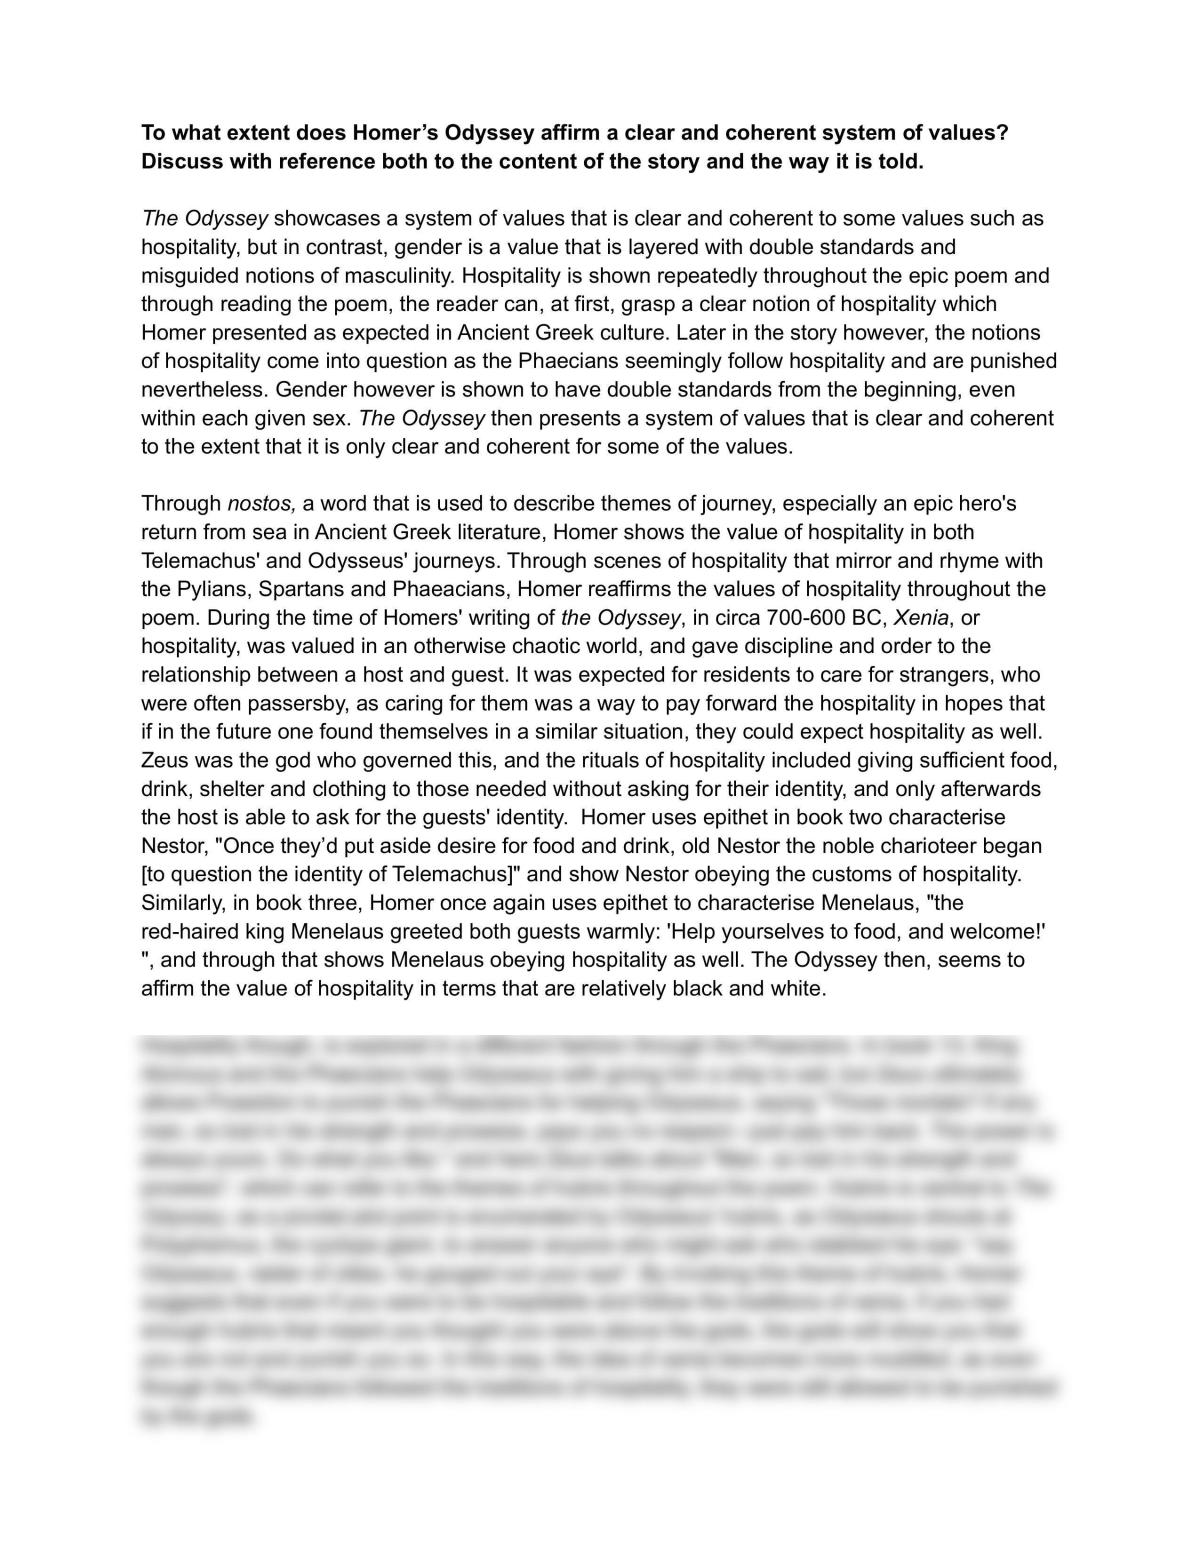 Essay on The Odyssey - Page 1